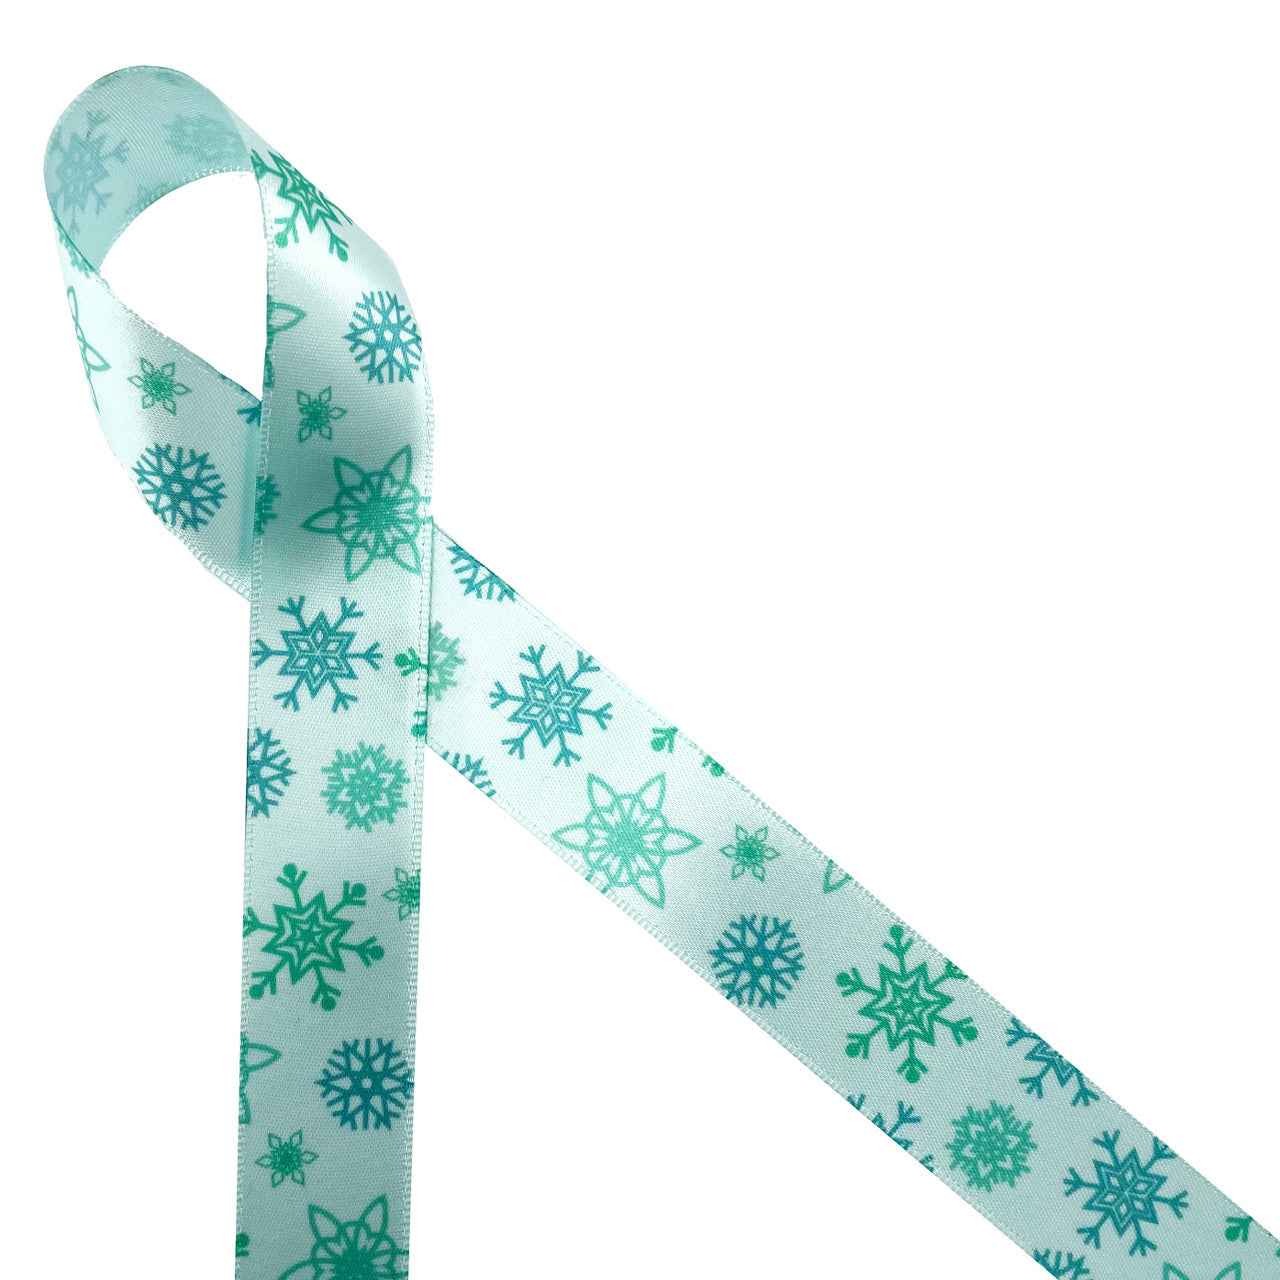 Snowflakes in medium blue on Icy Blue 7/8" Single Face Satin Ribbon, 10 Yards